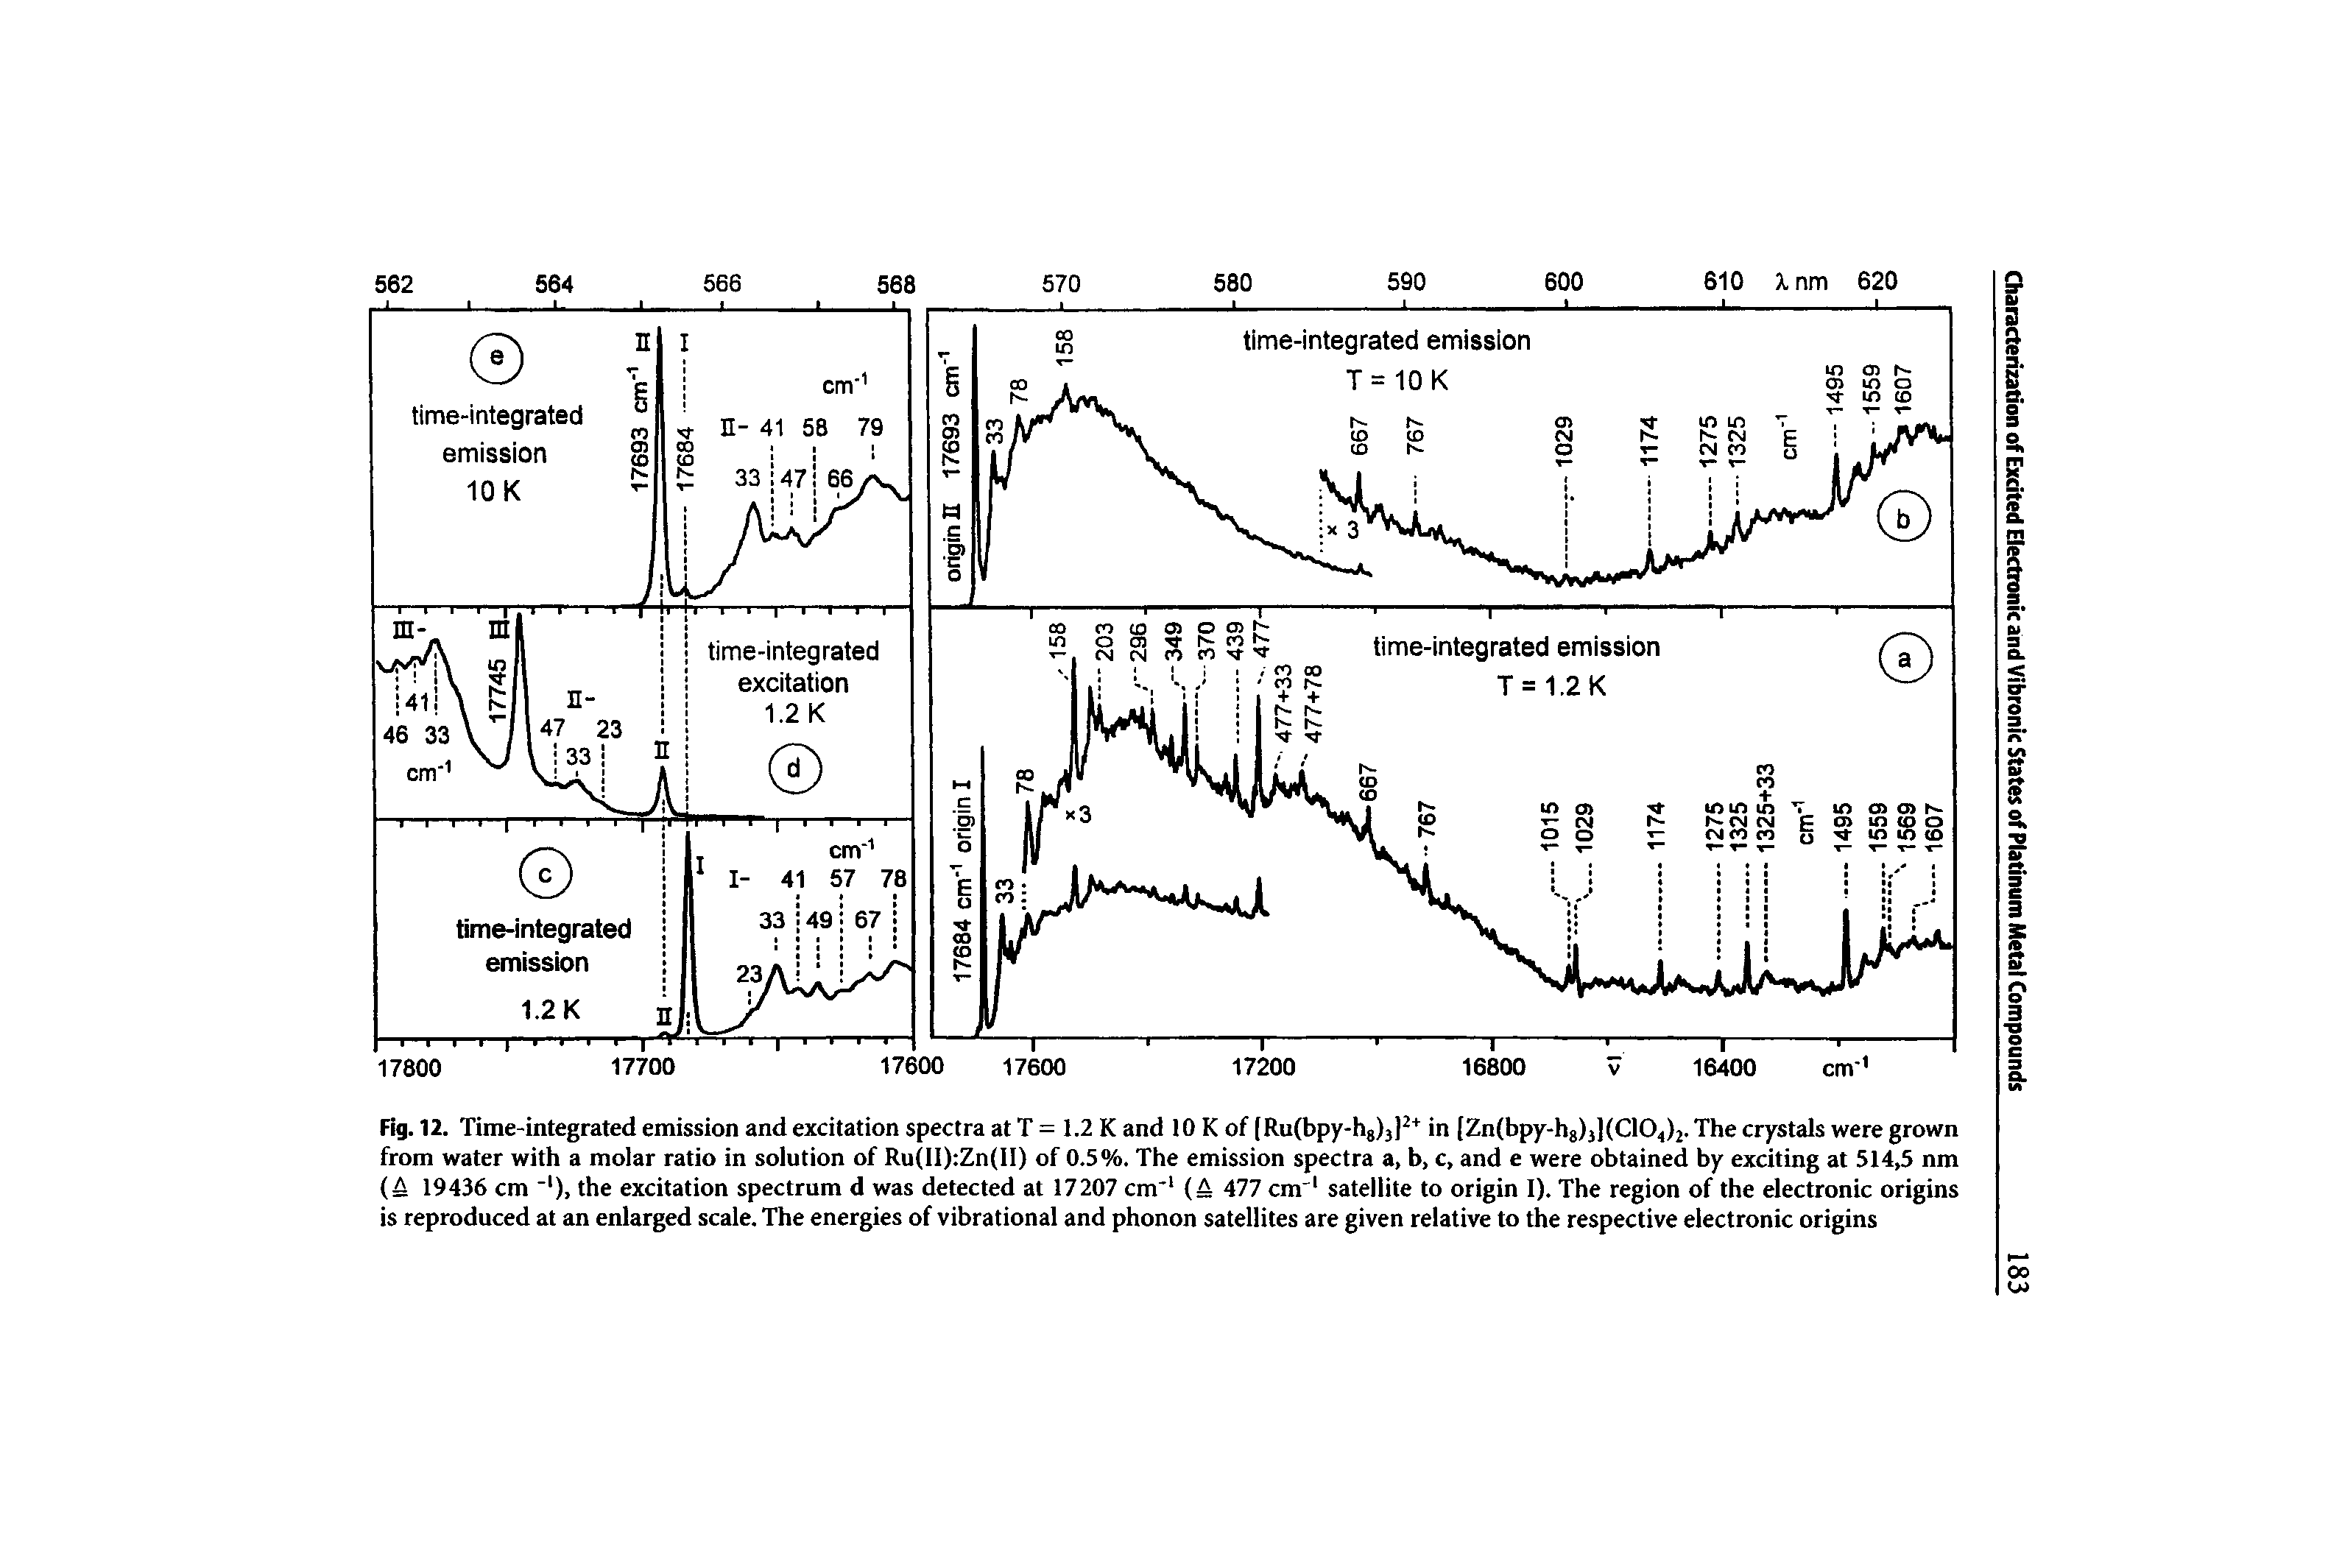 Fig. 12. Time-integrated emission and excitation spectra at T = 1.2 K and 10 K of (Ru(bpy-hj)3) in [Zn(bpy-h8)3](C104)2. The crystals were grown from water with a molar ratio in solution of Ru(ll) Zn(II) of 0.5%. The emission spectra a, b, c, and e were obtained by exciting at 514,5 nm (A 19436 cm the excitation spectrum d was detected at 17207 cm (A 477 cm satellite to origin I). The region of the electronic origins is reproduced at an enlarged scale. The energies of vibrational and phonon satellites are given relative to the respective electronic origins...